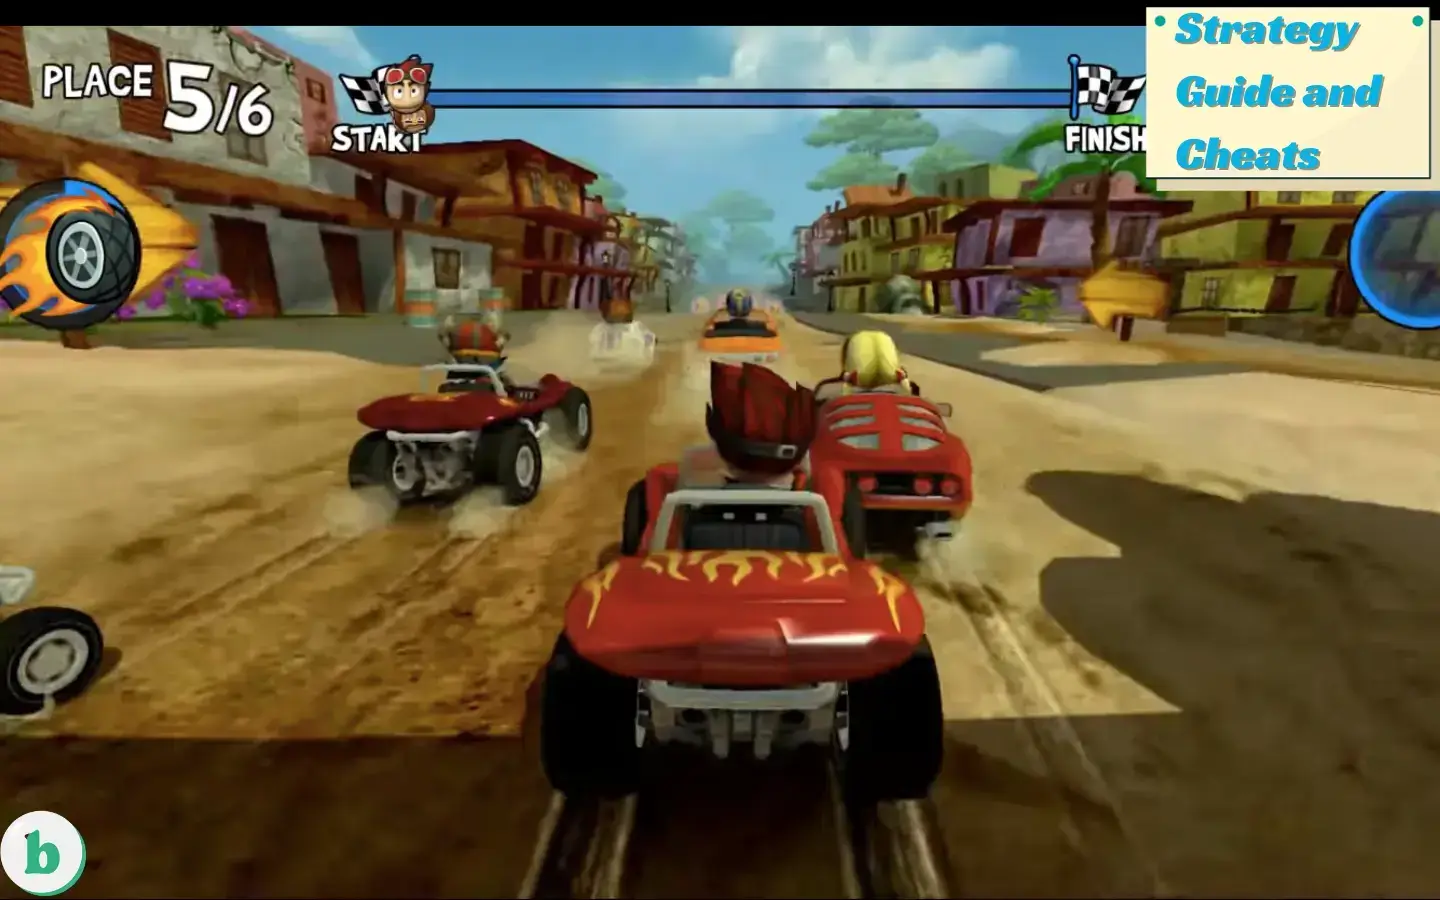 Strategy-Guide-and-Cheats-in-Beach-Buggy-Racing